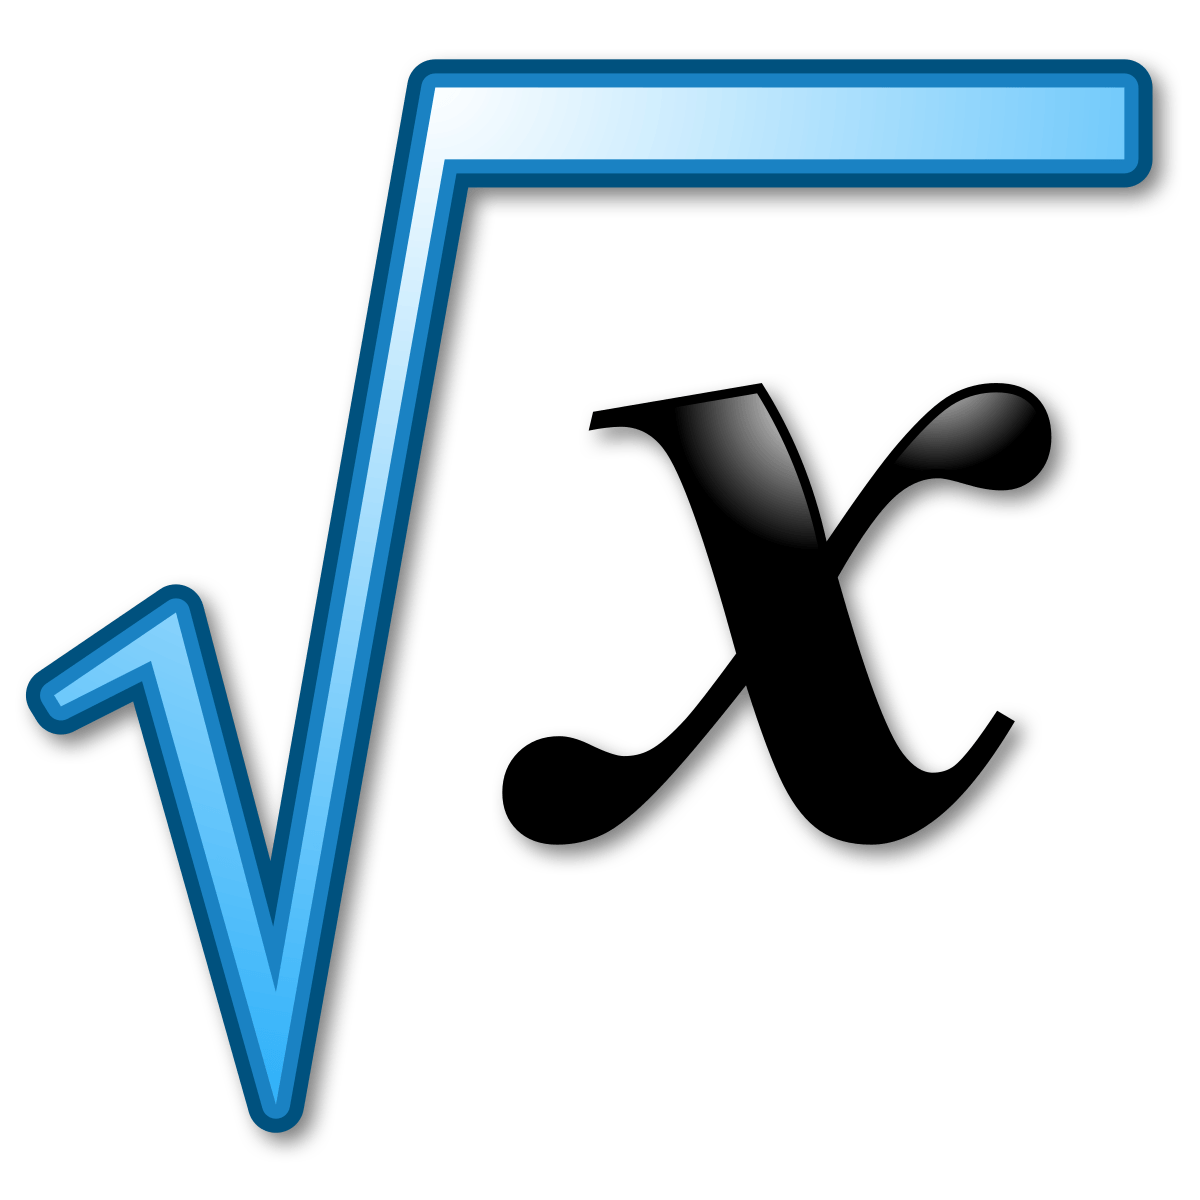 Square in a Blue P Logo - Square root